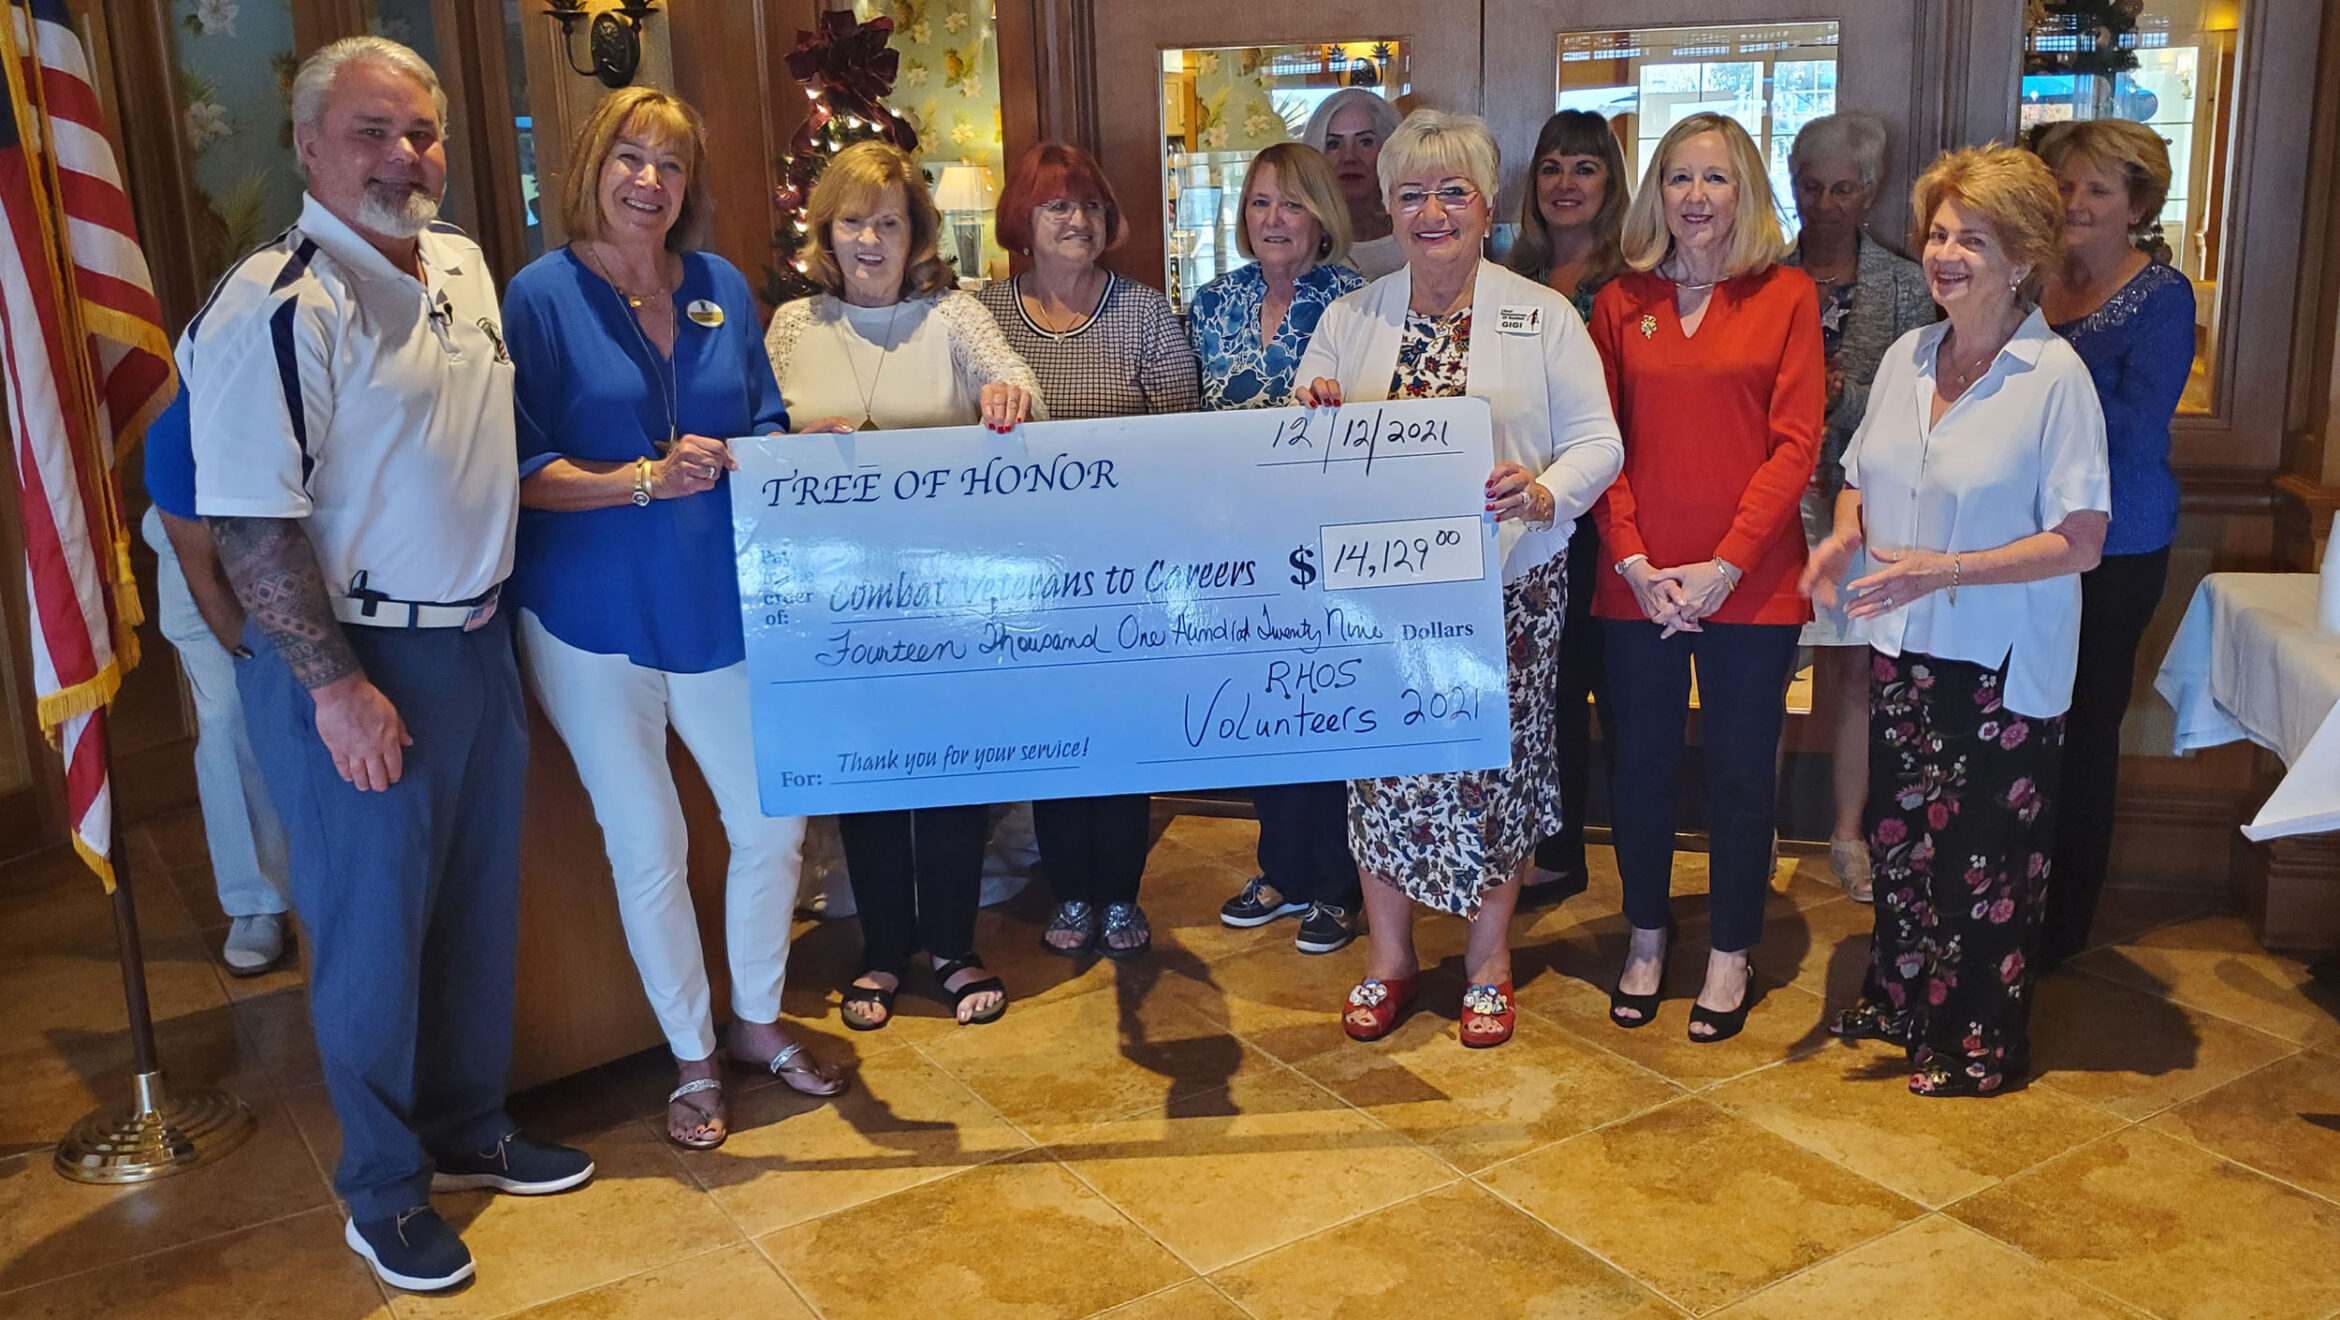 The Real Housewives of Sanibel Raise $14,129 (and counting) for CVC